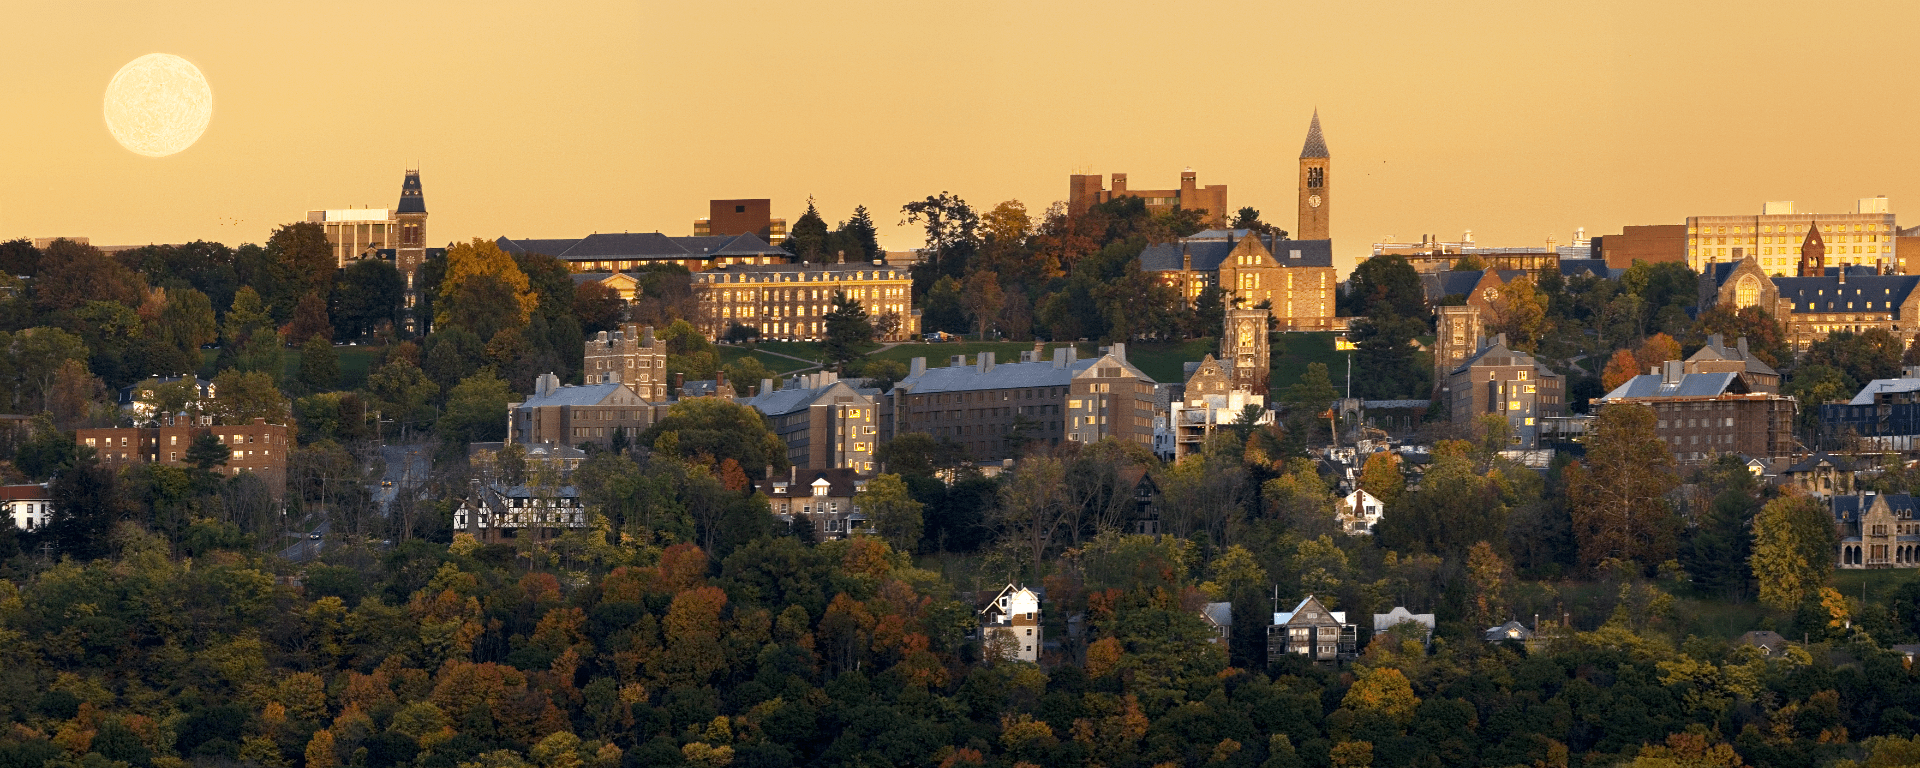 View of Cornell's campus